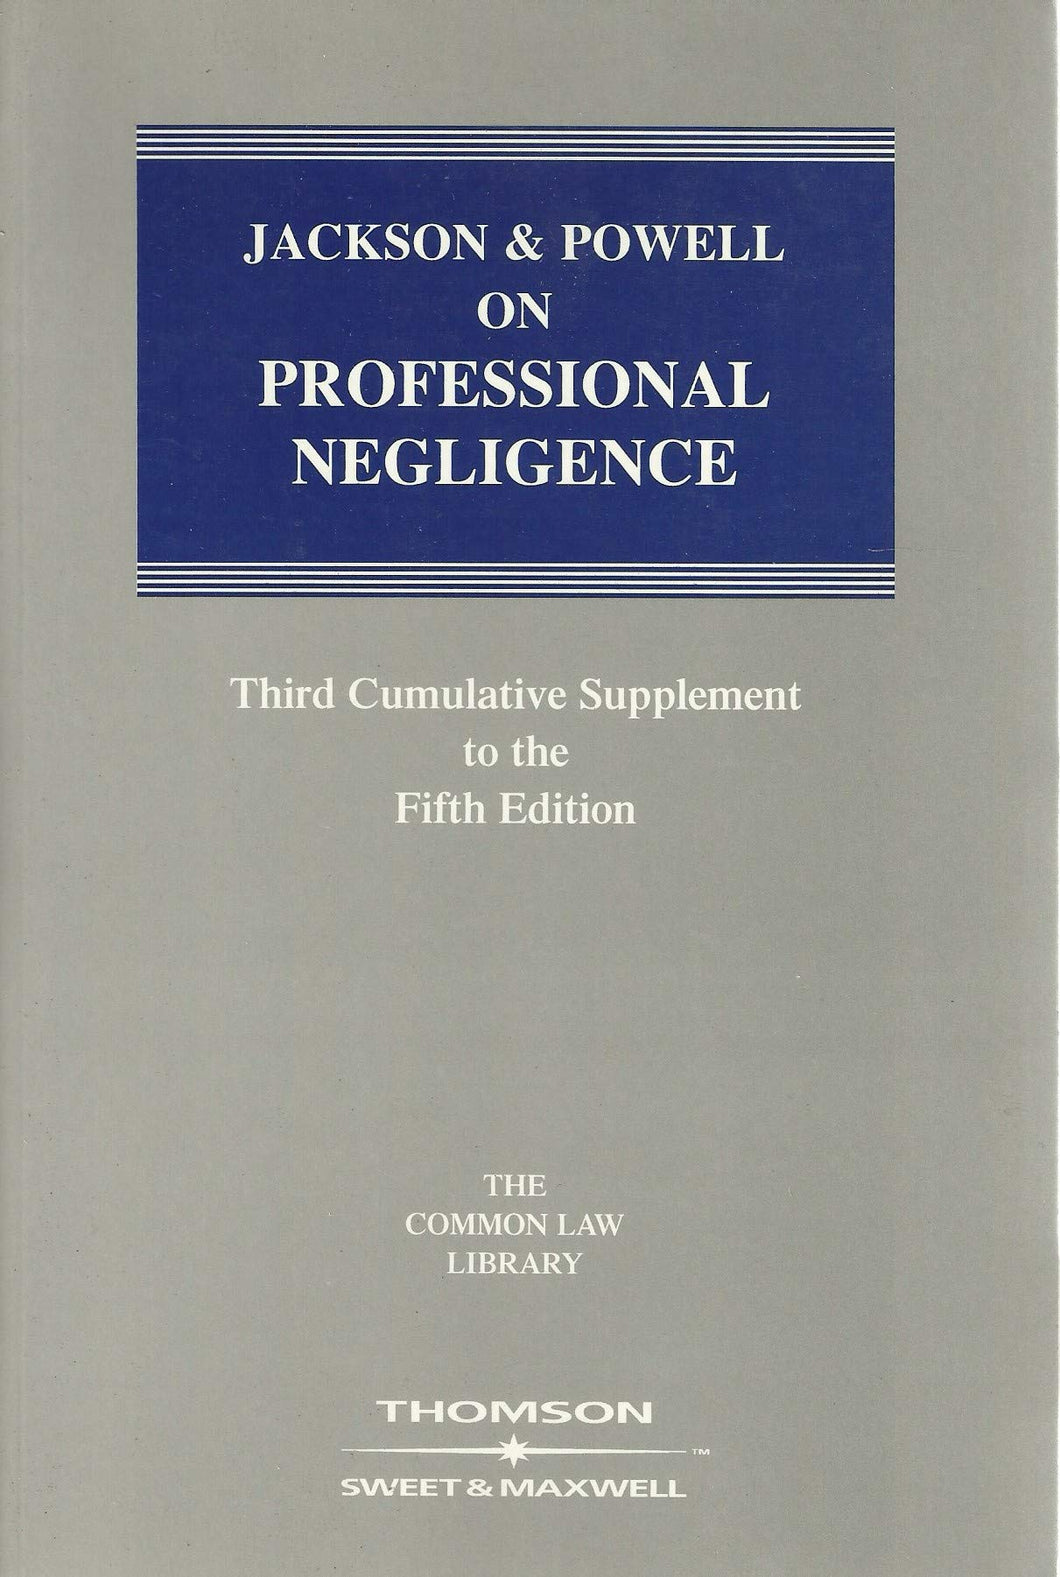 Jackson & Powell on Professional Negligence 3rd Supplement